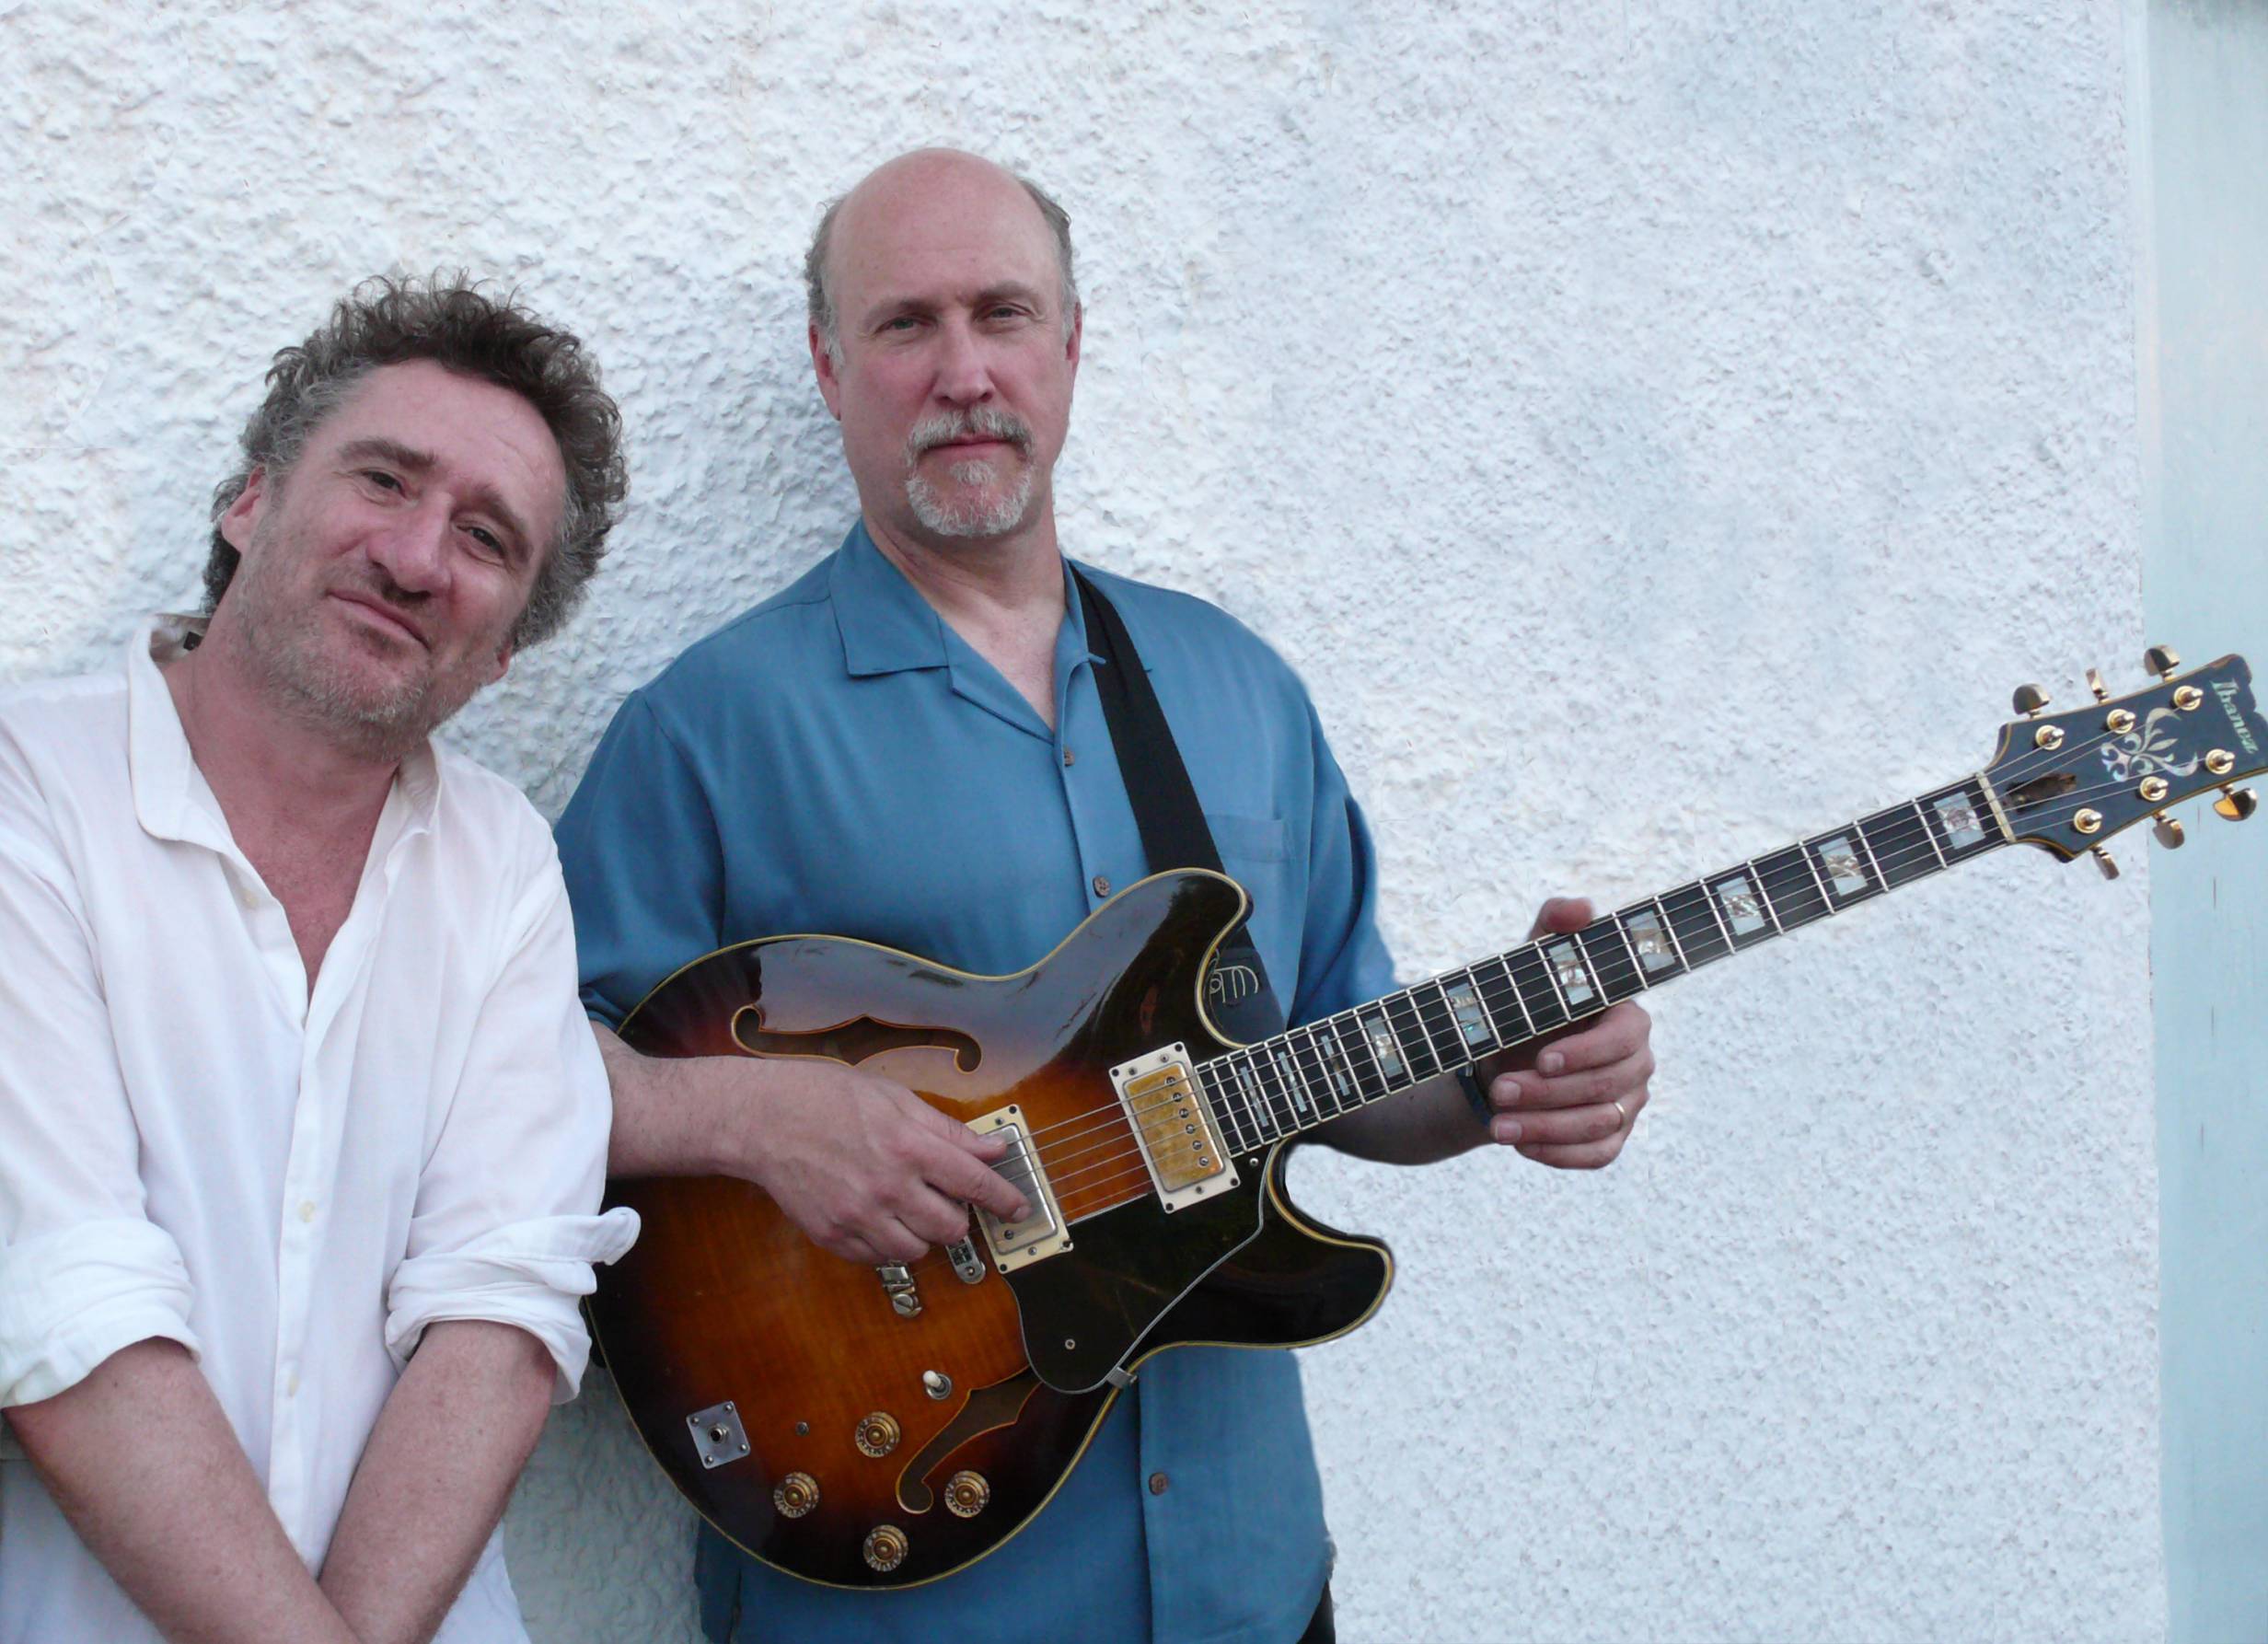 John Scofield: Playing music is all he ever wanted